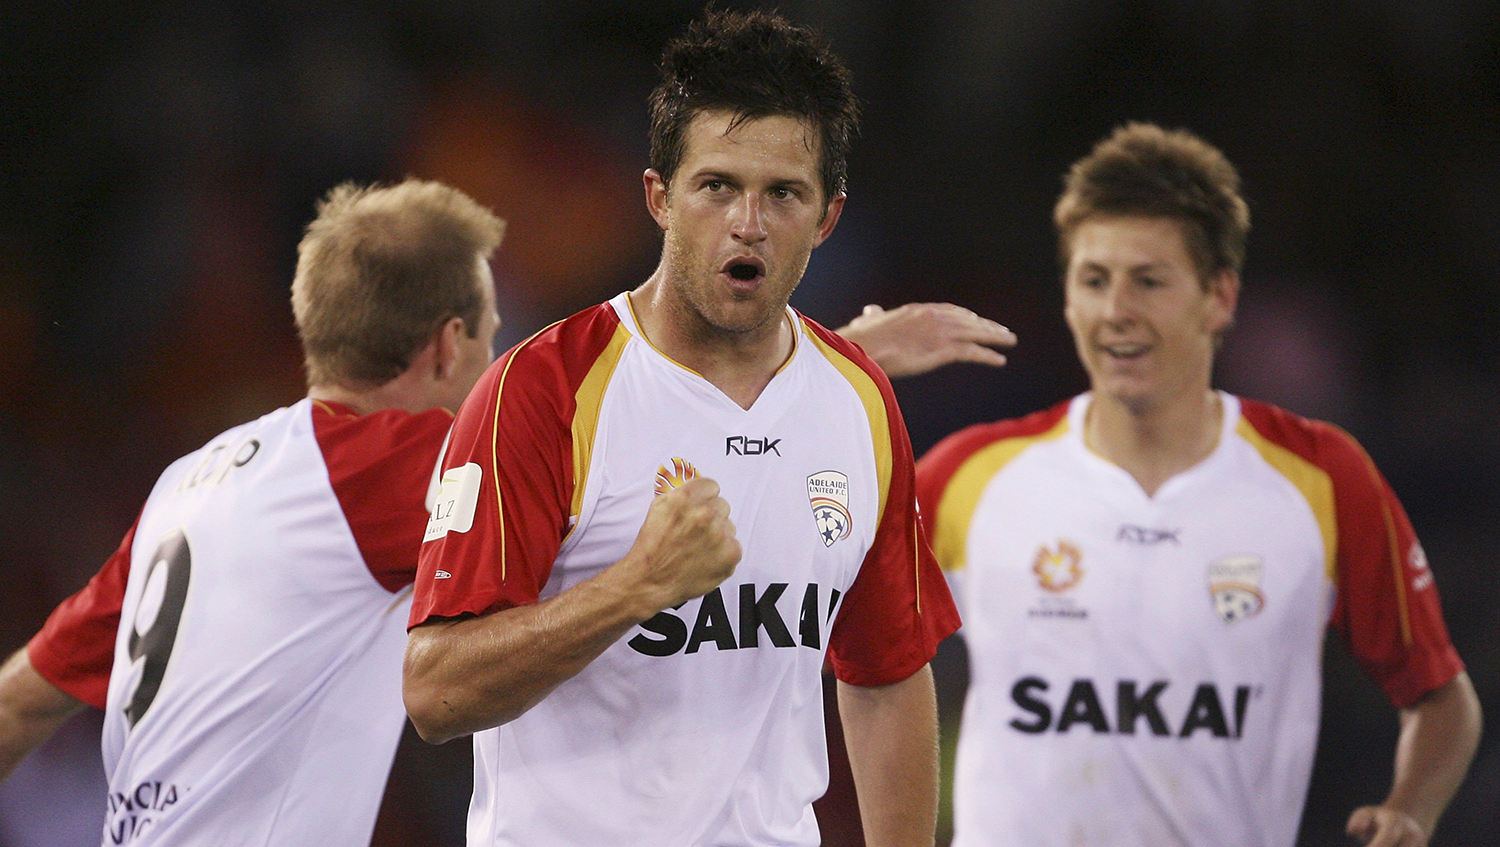 Greg Owens scored the lone goal in theReds win over Victory in 2006